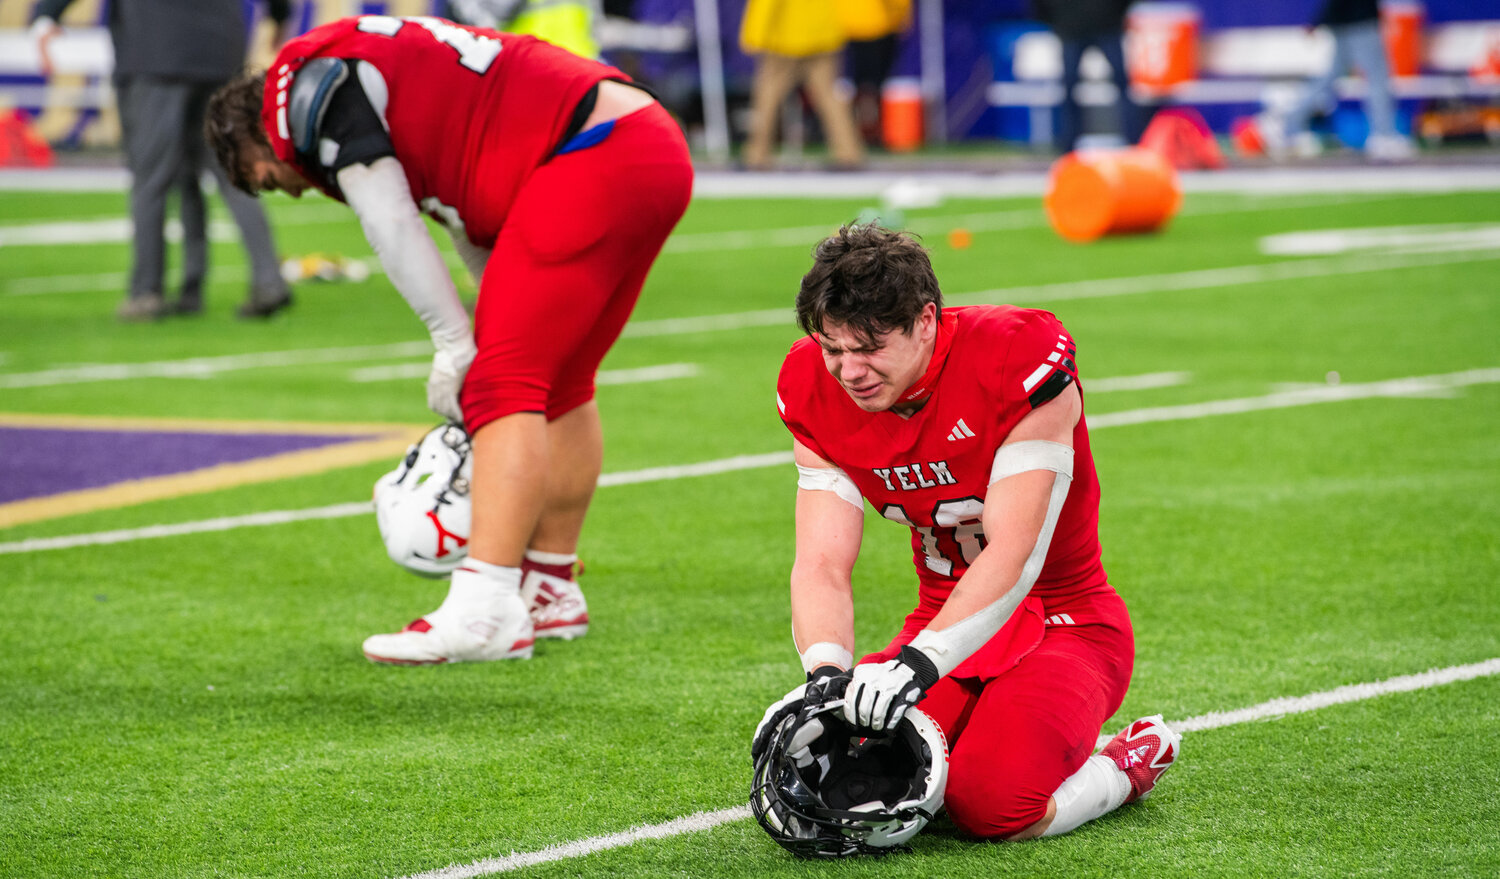 Yelm linebacker Nathan Ford, front, and lineman Landen Barger, back, react after the Tornados’ loss to Bellevue during the 3A state football championship game on Friday, Dec. 1, at Husky Stadium in Seattle.